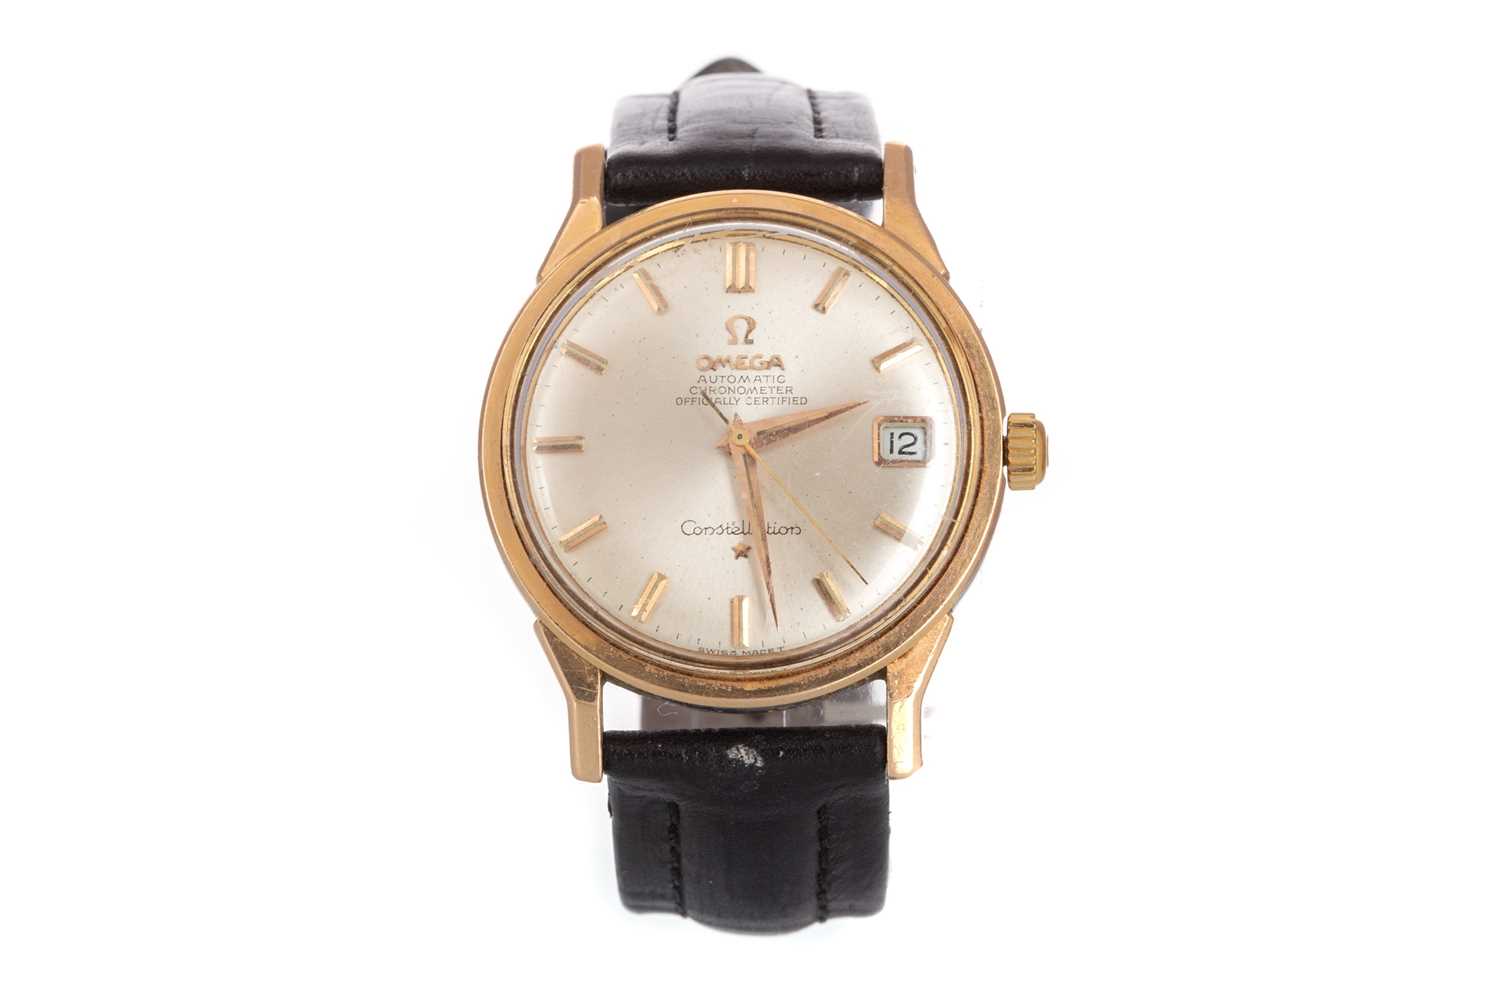 OMEGA CONSTELLATION GOLD PLATED AUTOMATIC WRIST WATCH,